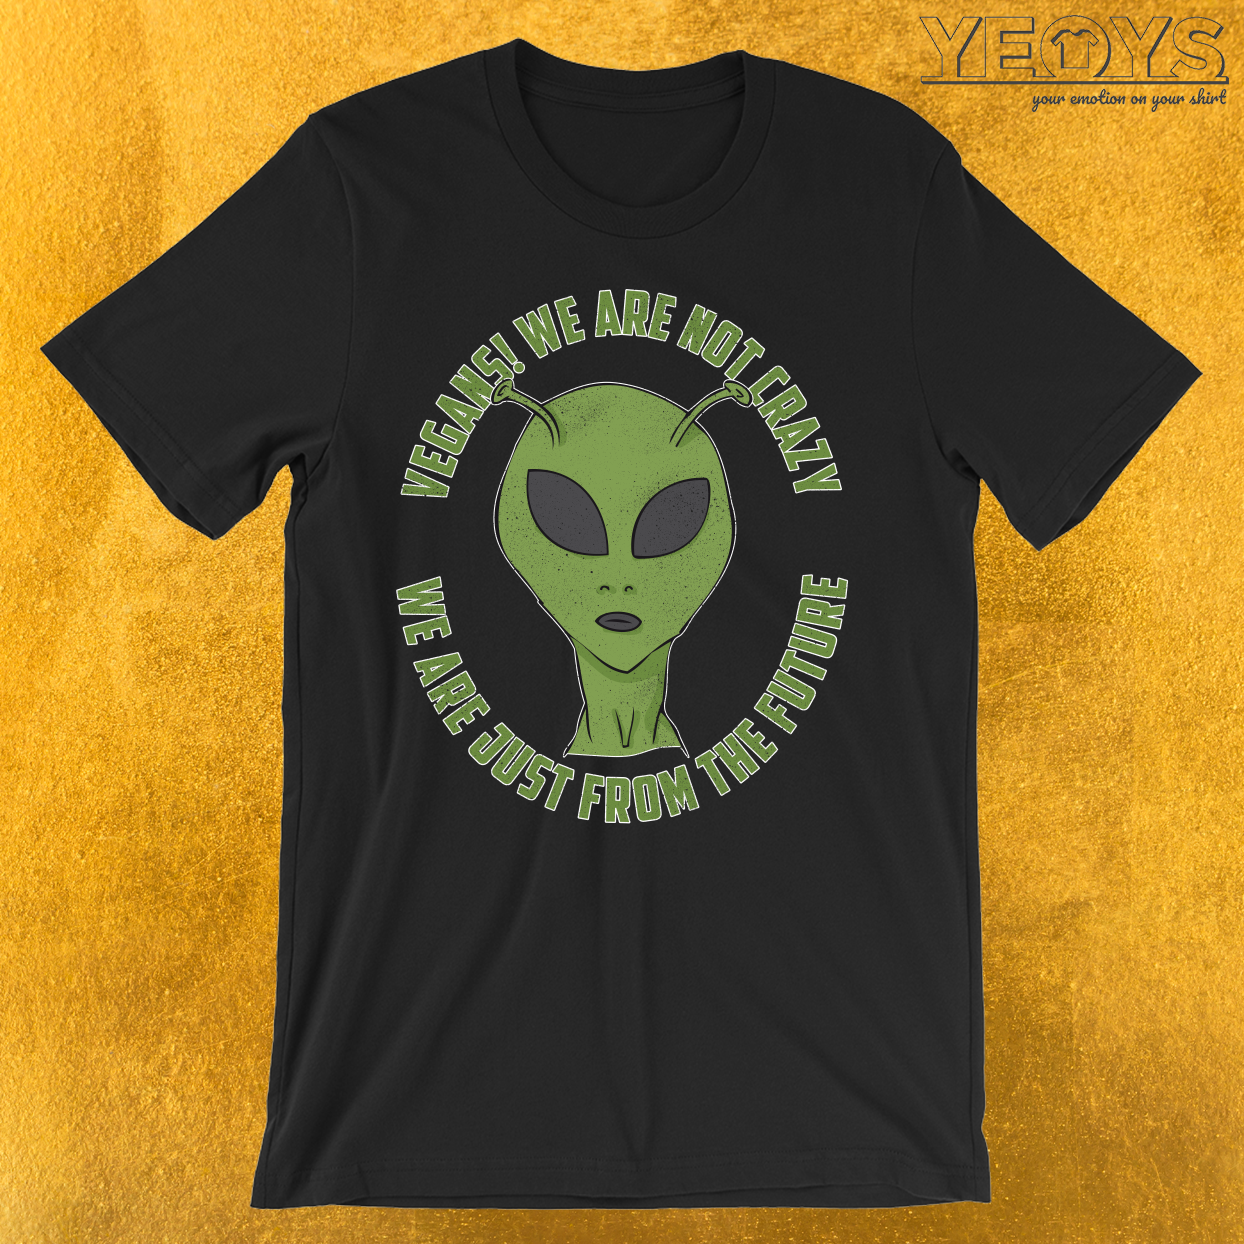 Vegans We Are Not Crazy From Future T-Shirt